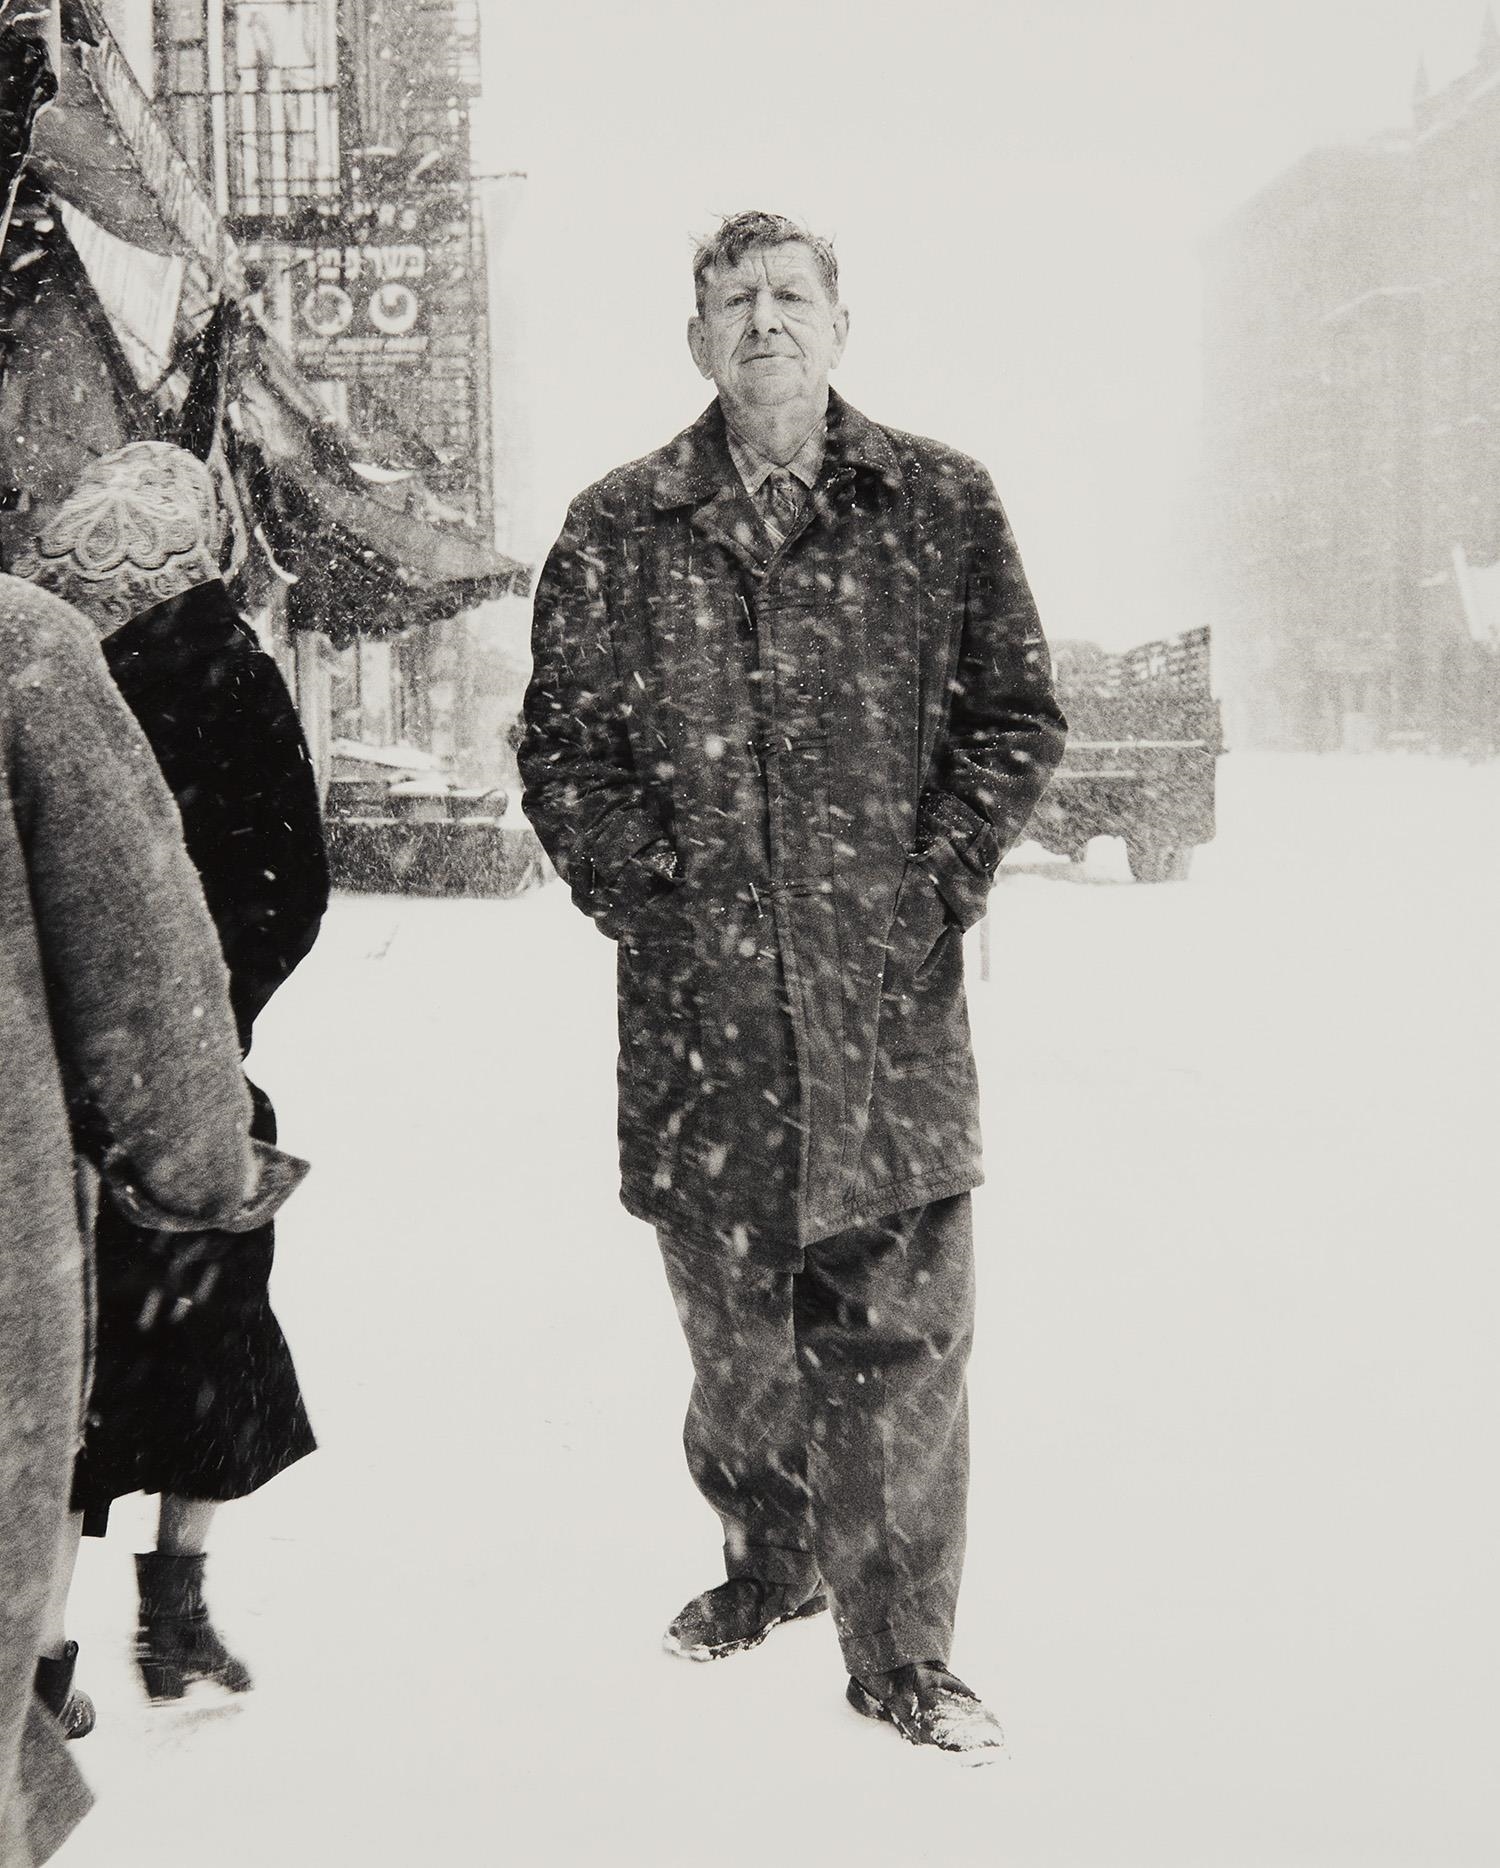 W. H. Auden, poet, St. Marks Place, New York City, March 3, 1960